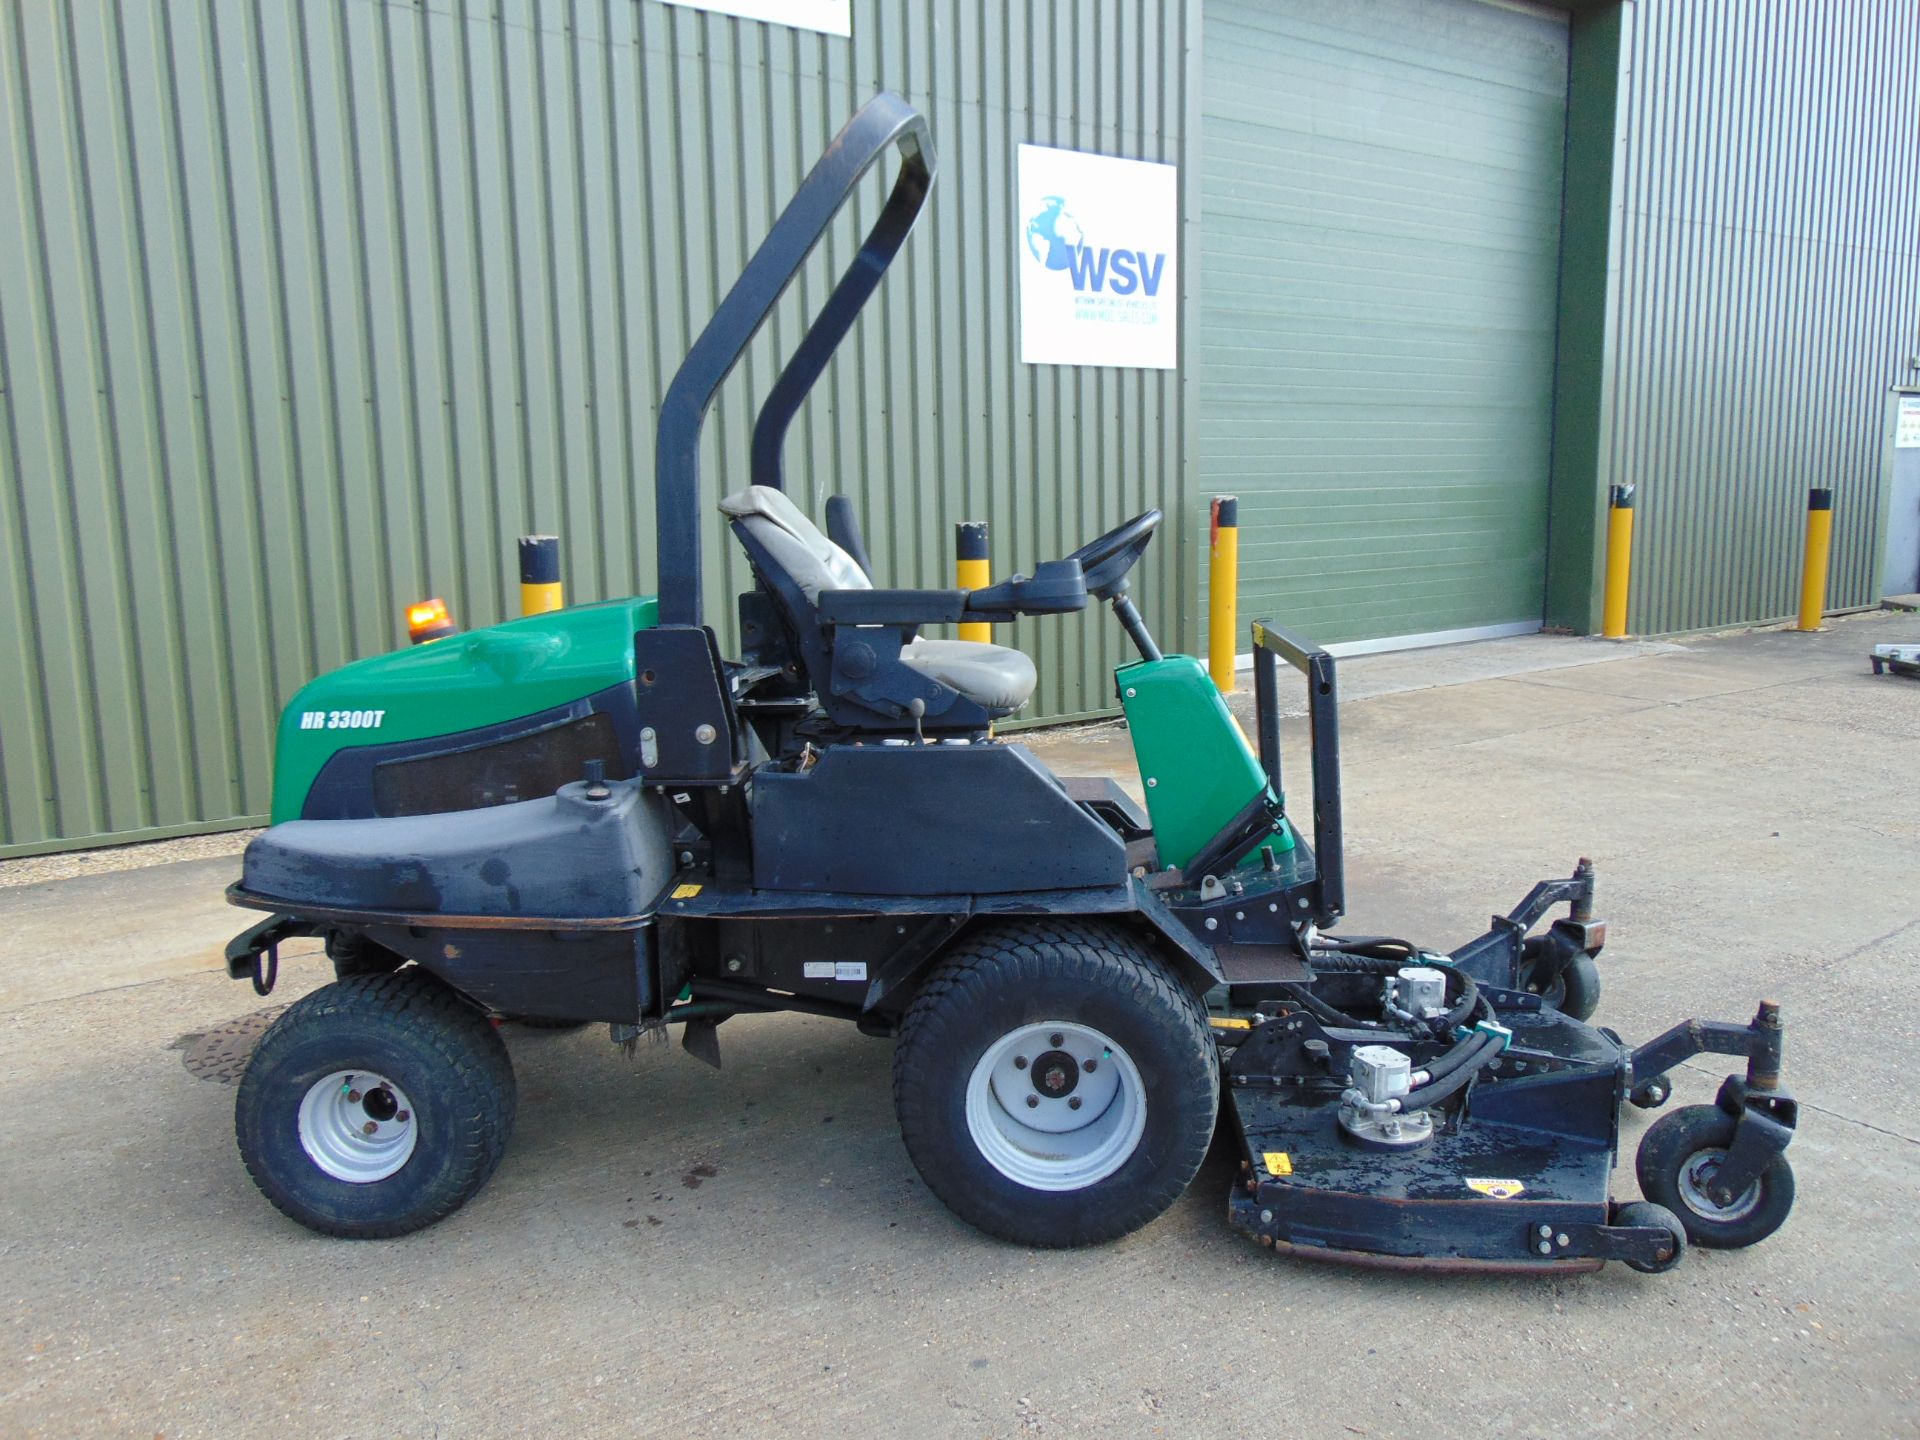 2012 Ransomes HR 3300T Outfront 3 Blade Hydraulic Rotary Mower. 4,560 hrs from UK Govt Contract. - Image 6 of 22